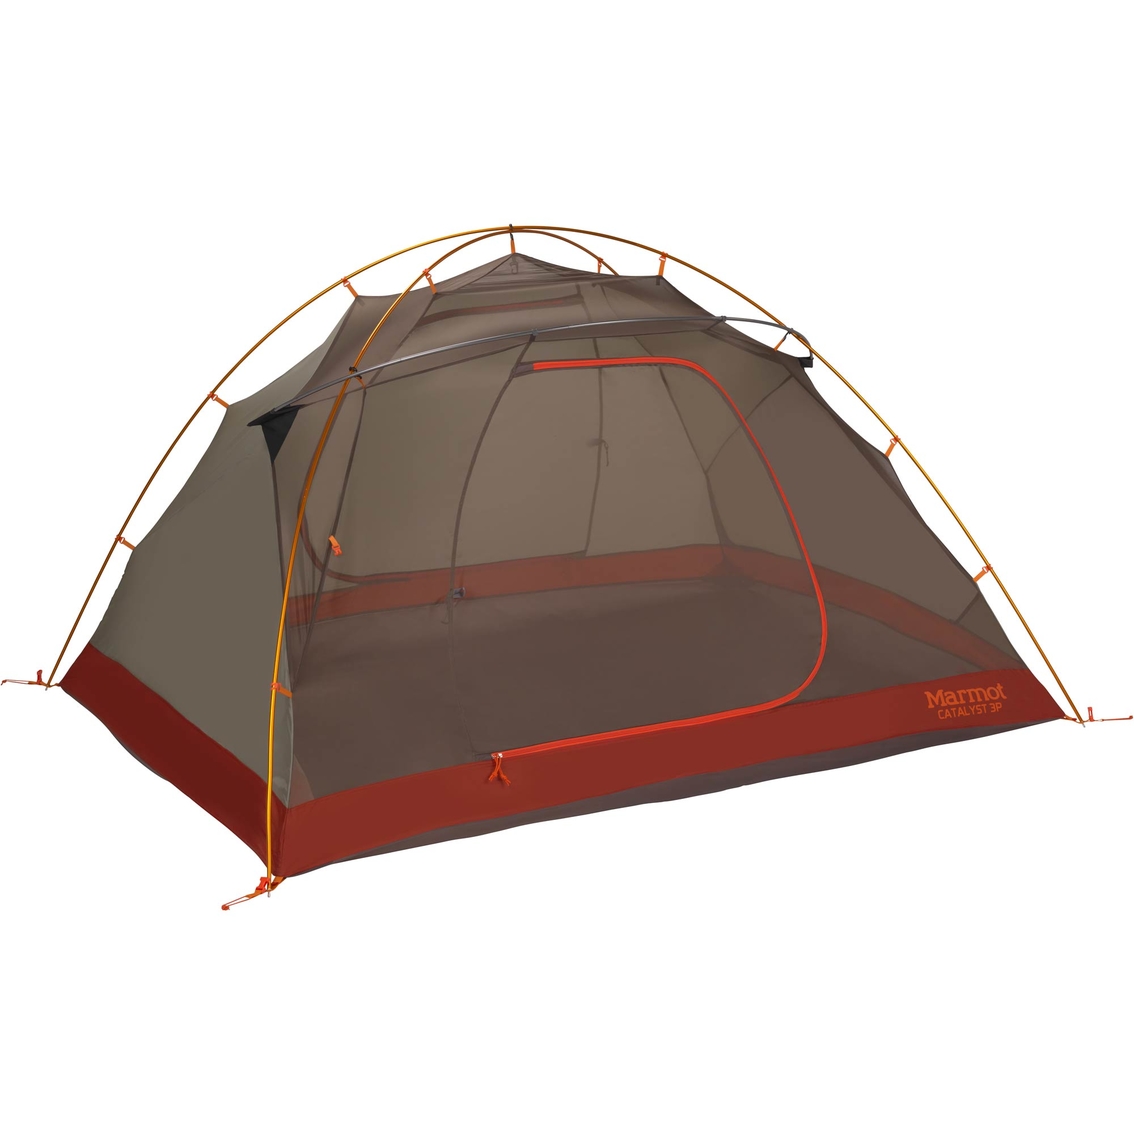 Marmot Catalyst 3 Person Tent - Image 3 of 3